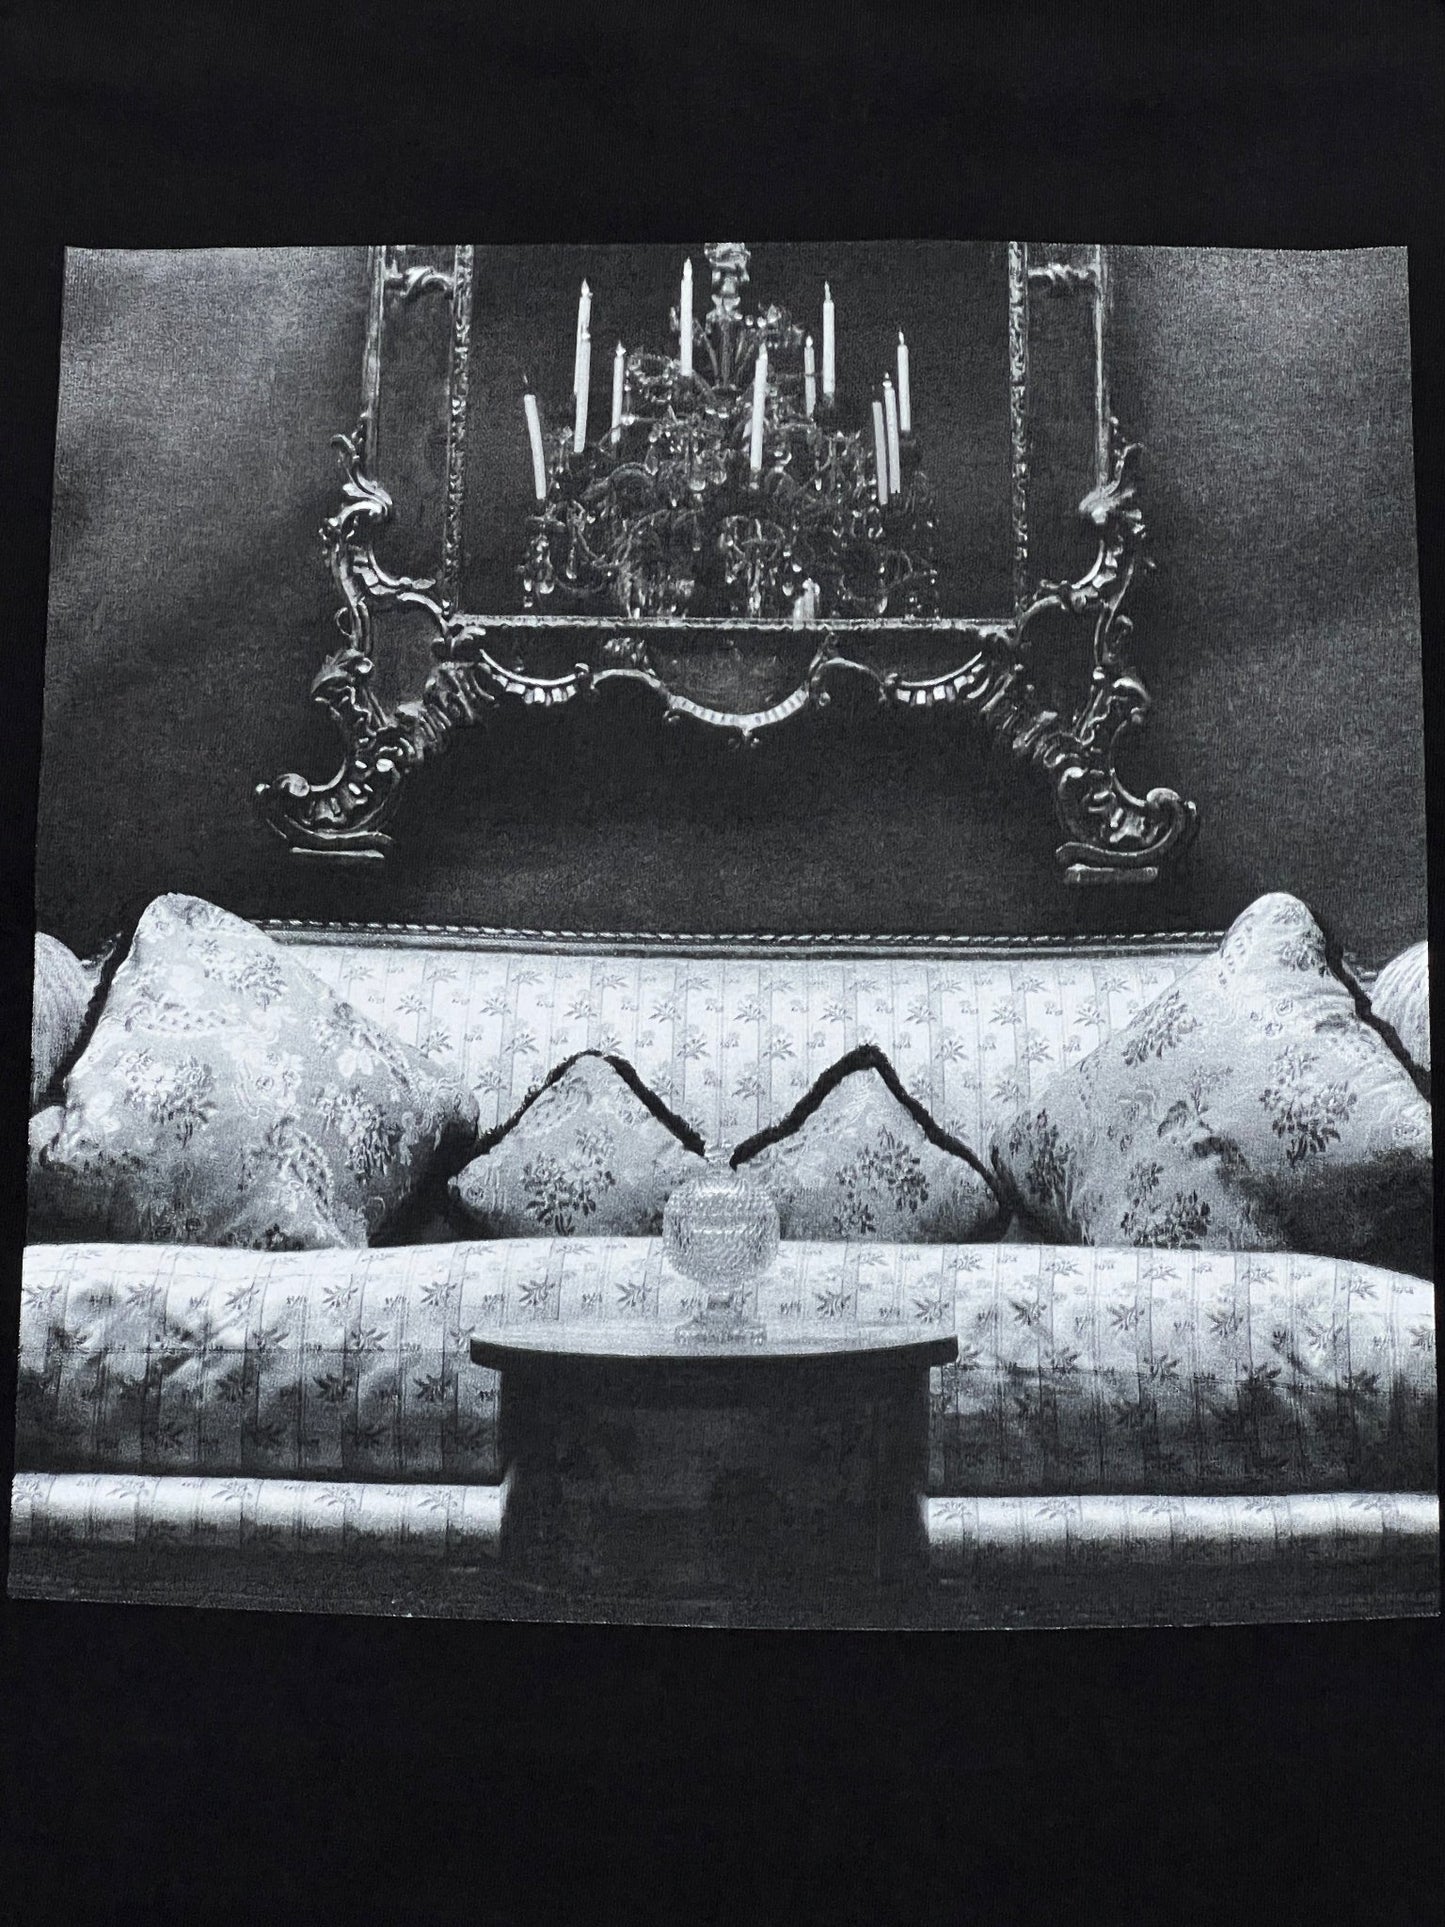 A PLEASURES black t-shirt with an image of a couch and a chandelier.